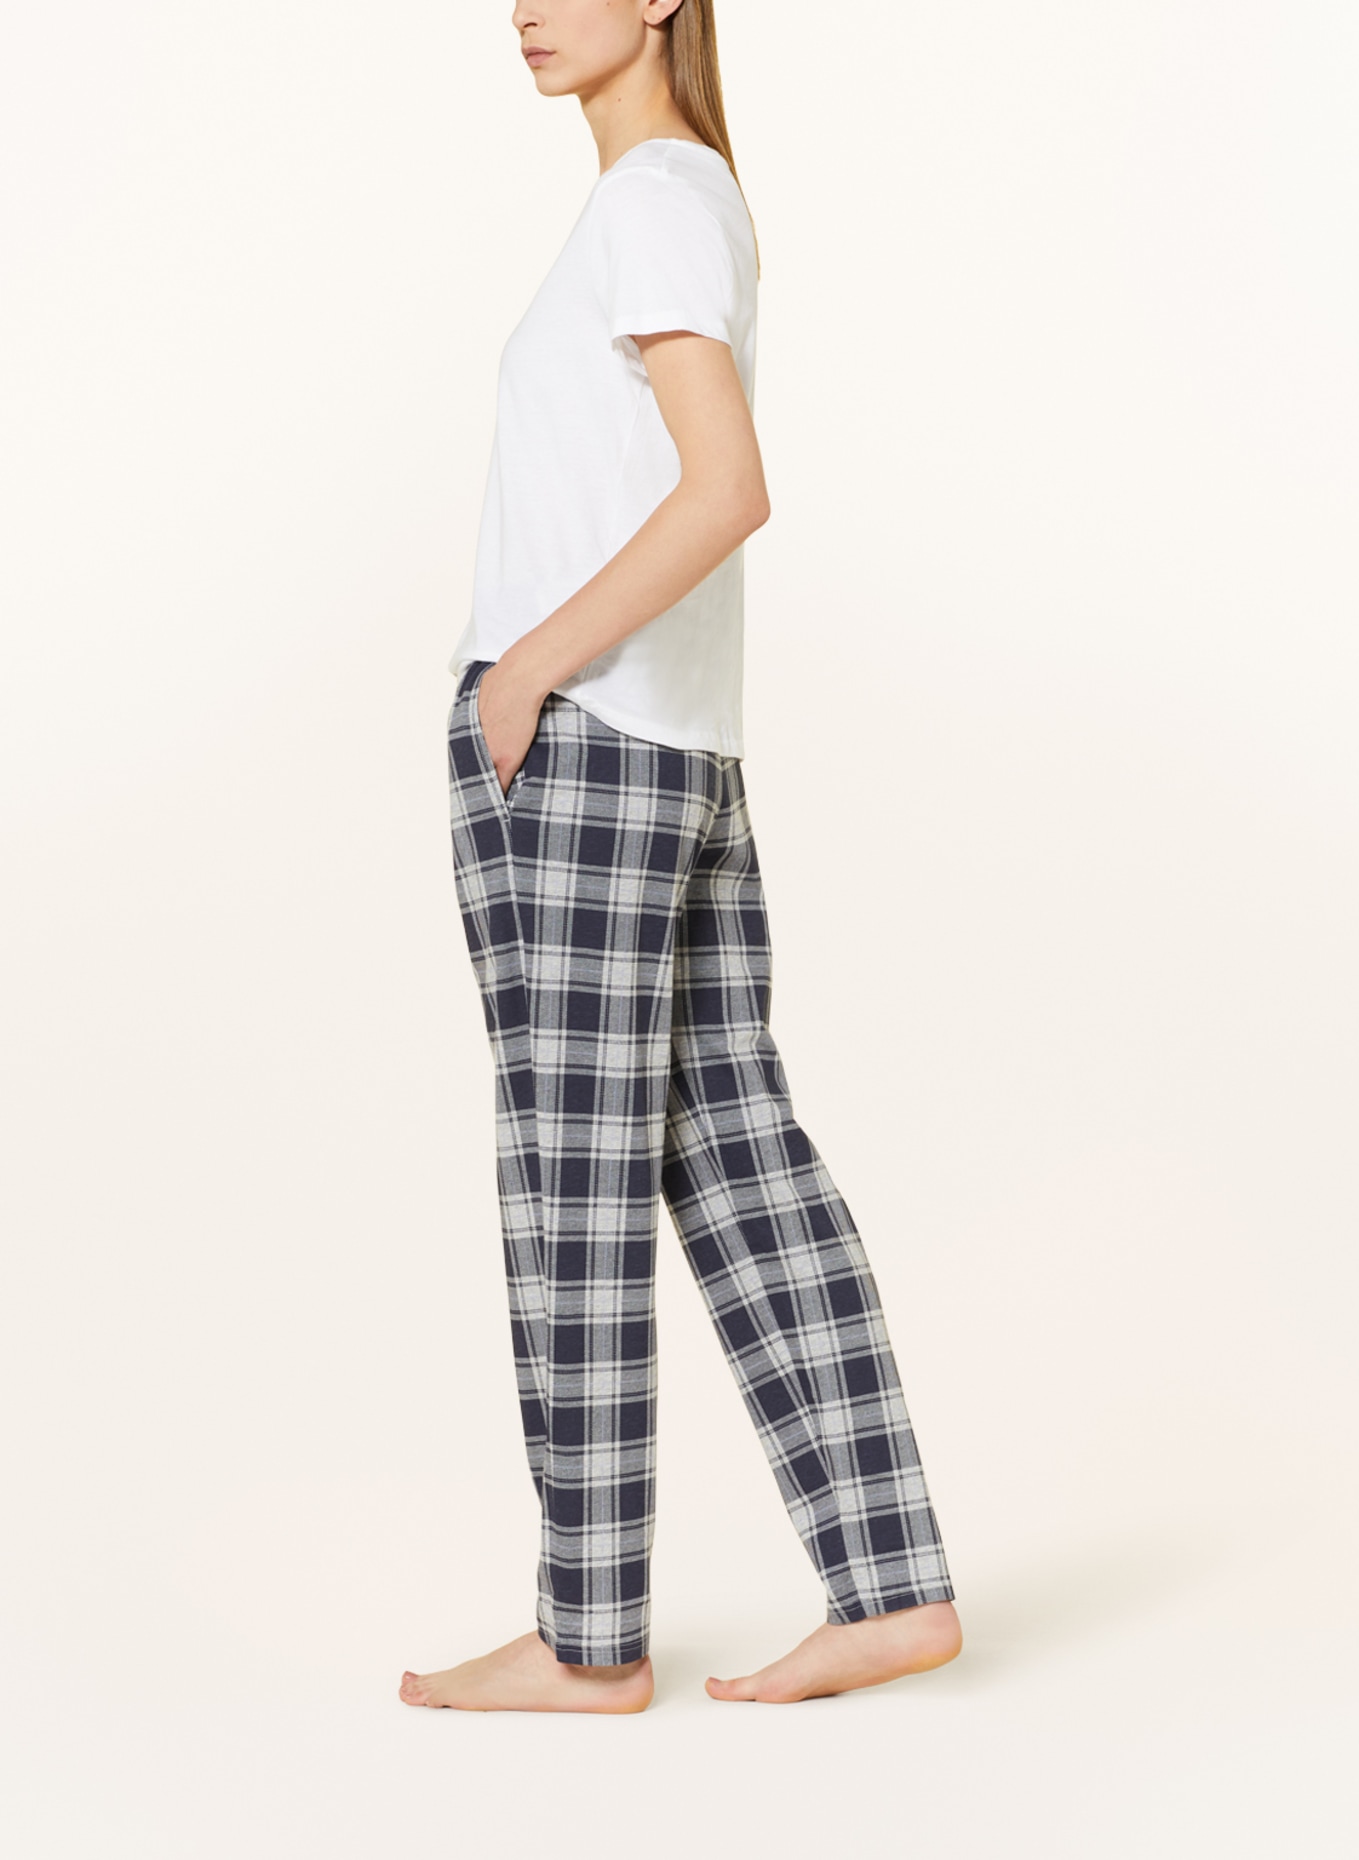 SCHIESSER Pajama pants in blue/ light MIX+RELAX blue